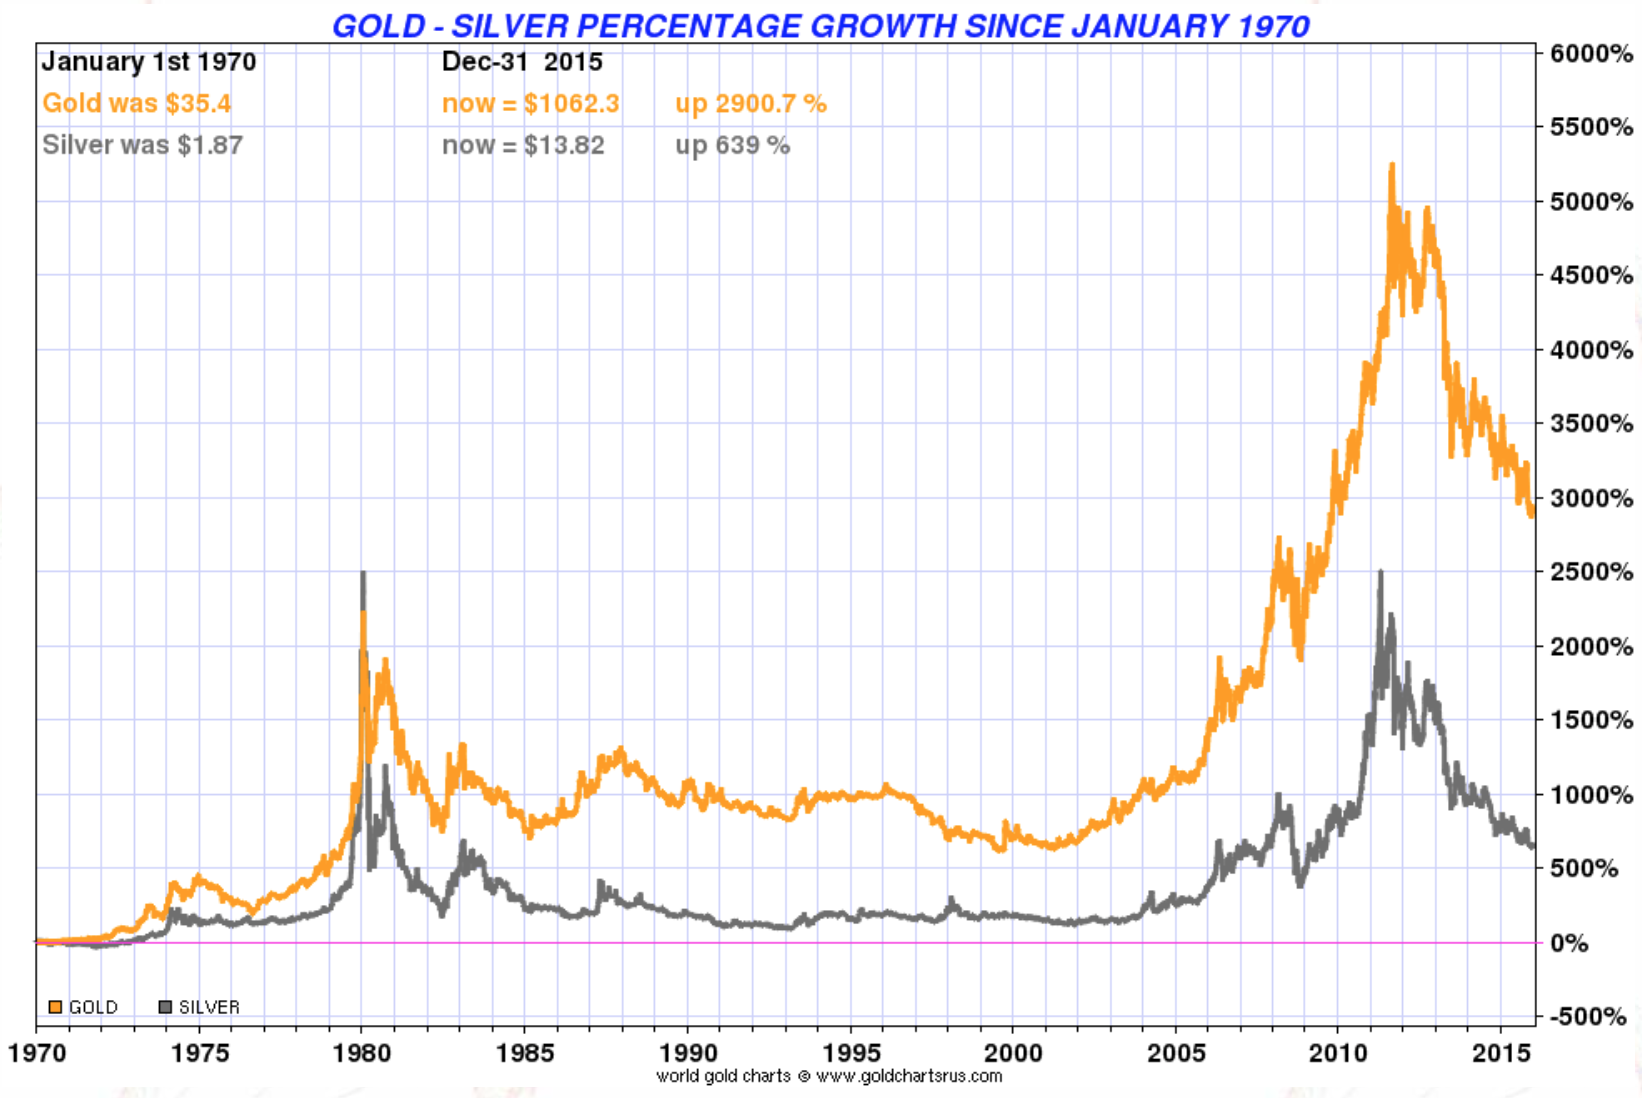 Gold - Silver percentage growth since january 1970